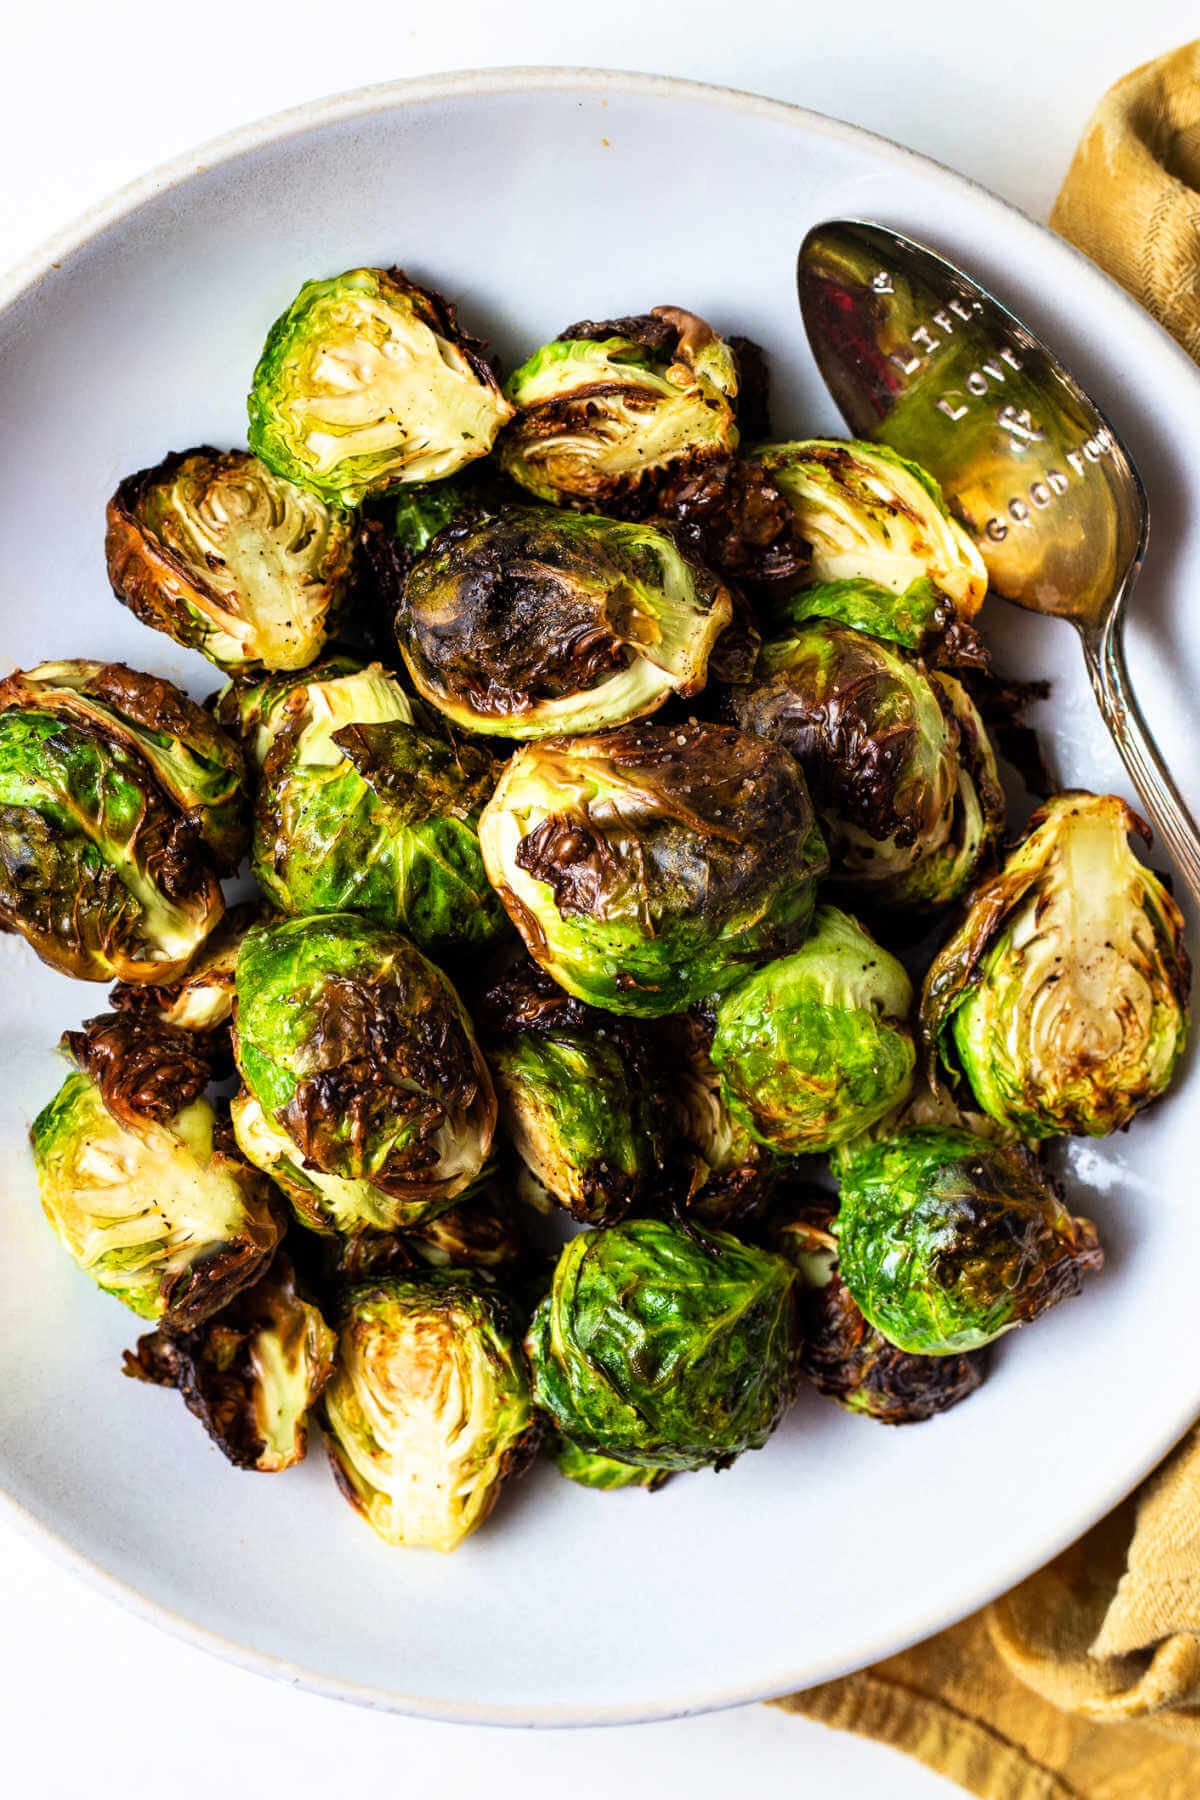 crispy air fryer brussels sprouts in a white bowl with a serving spoon and a gold napkin to the side.